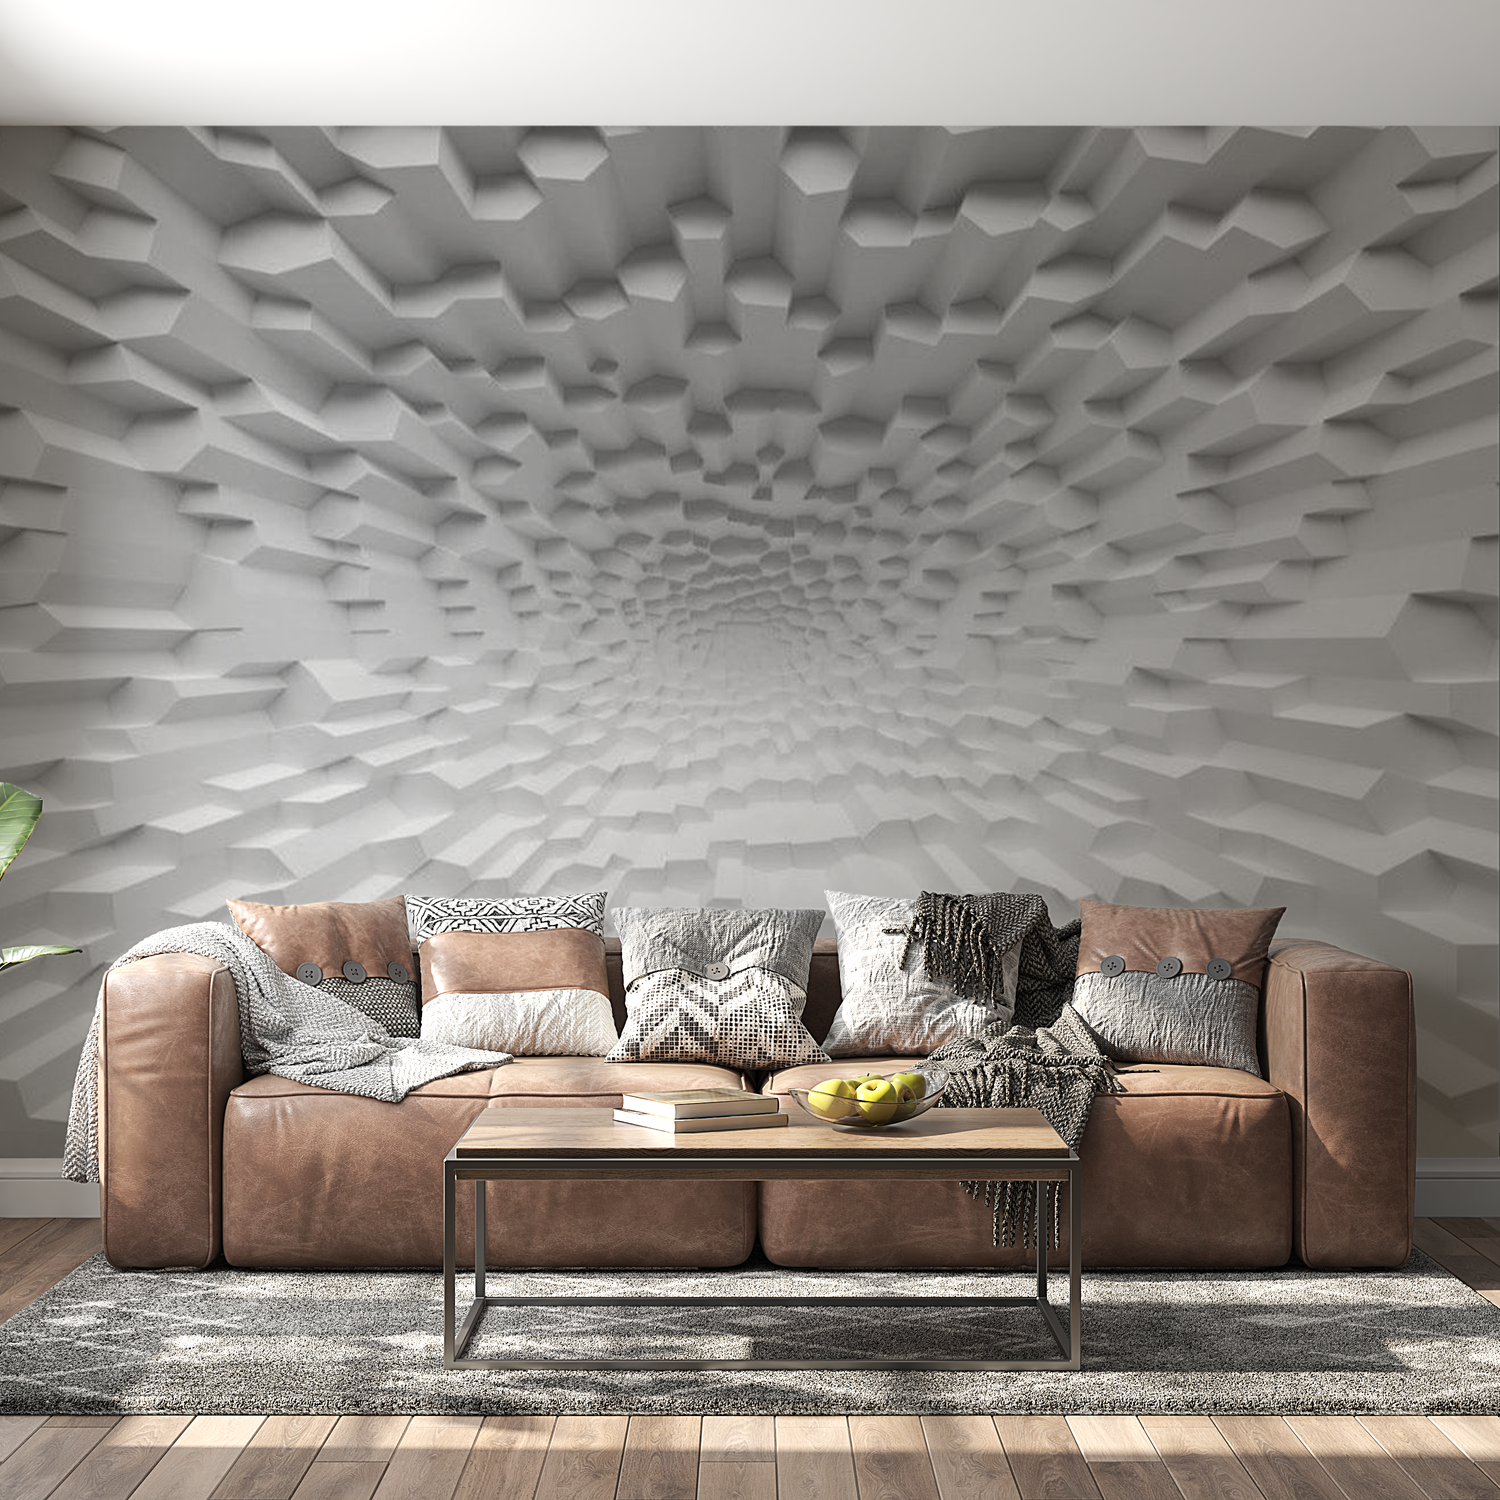 3D Illusion Wallpaper Wall Mural - The Abyss Of Oblivion 39"Wx27"H